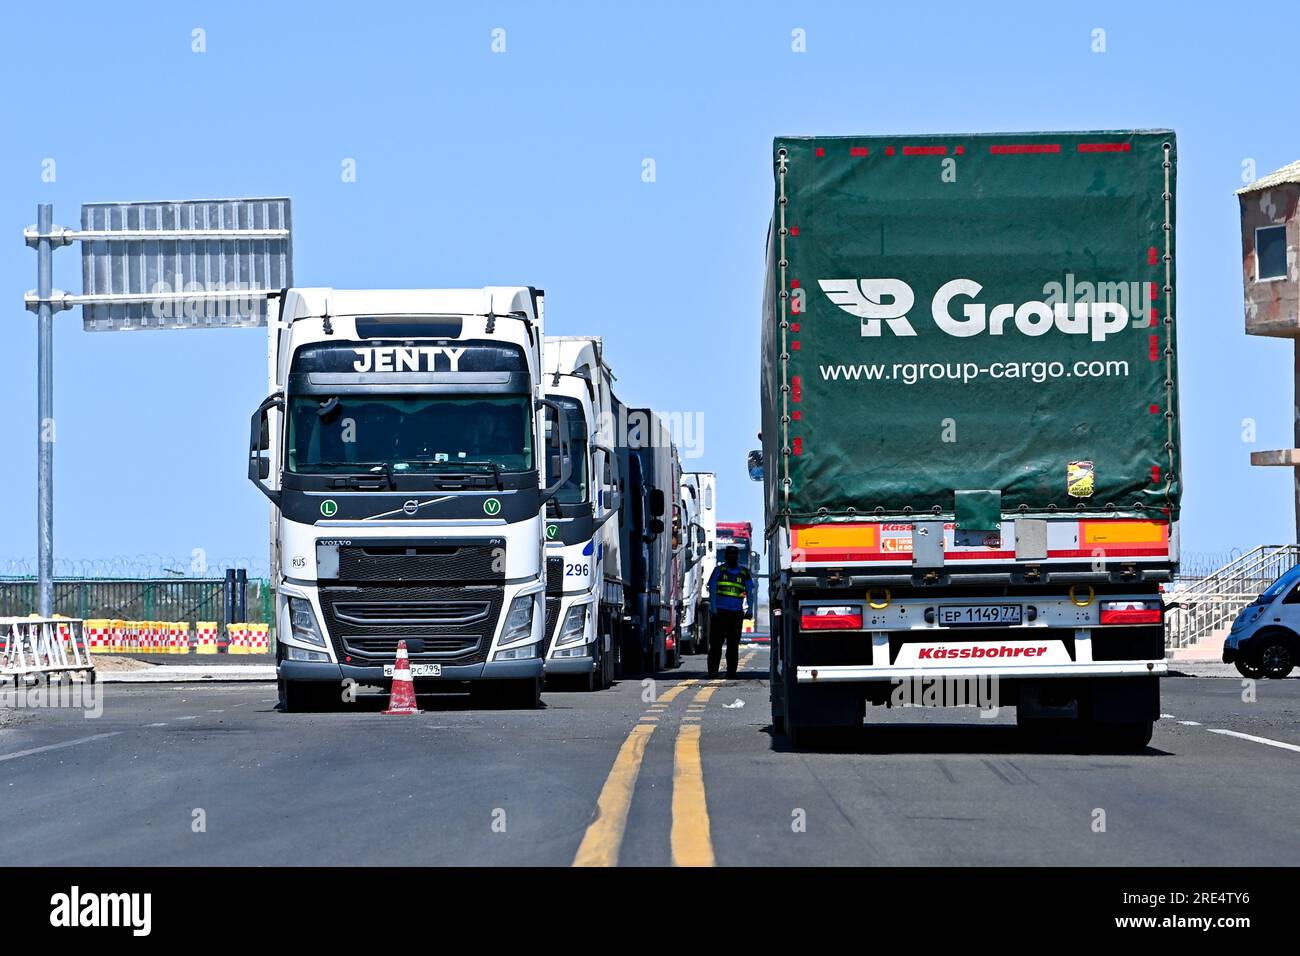 (230725) -- ALATAW PASS, July 25, 2023 (Xinhua) -- Cargo trucks are pictured at the Alataw Pass in northwest China's Xinjiang Uygur Autonomous Region, July 24, 2023. In recent years, various measures have been taken to create a better business environment for cross-border e-commerce enterprises in Alataw Pass. The cross-border e-commerce business was launched in the inland port in northwest China's Xinjiang Uygur Autonomous Region in January 2020. In the first half of this year, more than 14.50 million cross-border e-commerce packages worth about 1.677 billion yuan (about 235 million U.S. doll Stock Photo